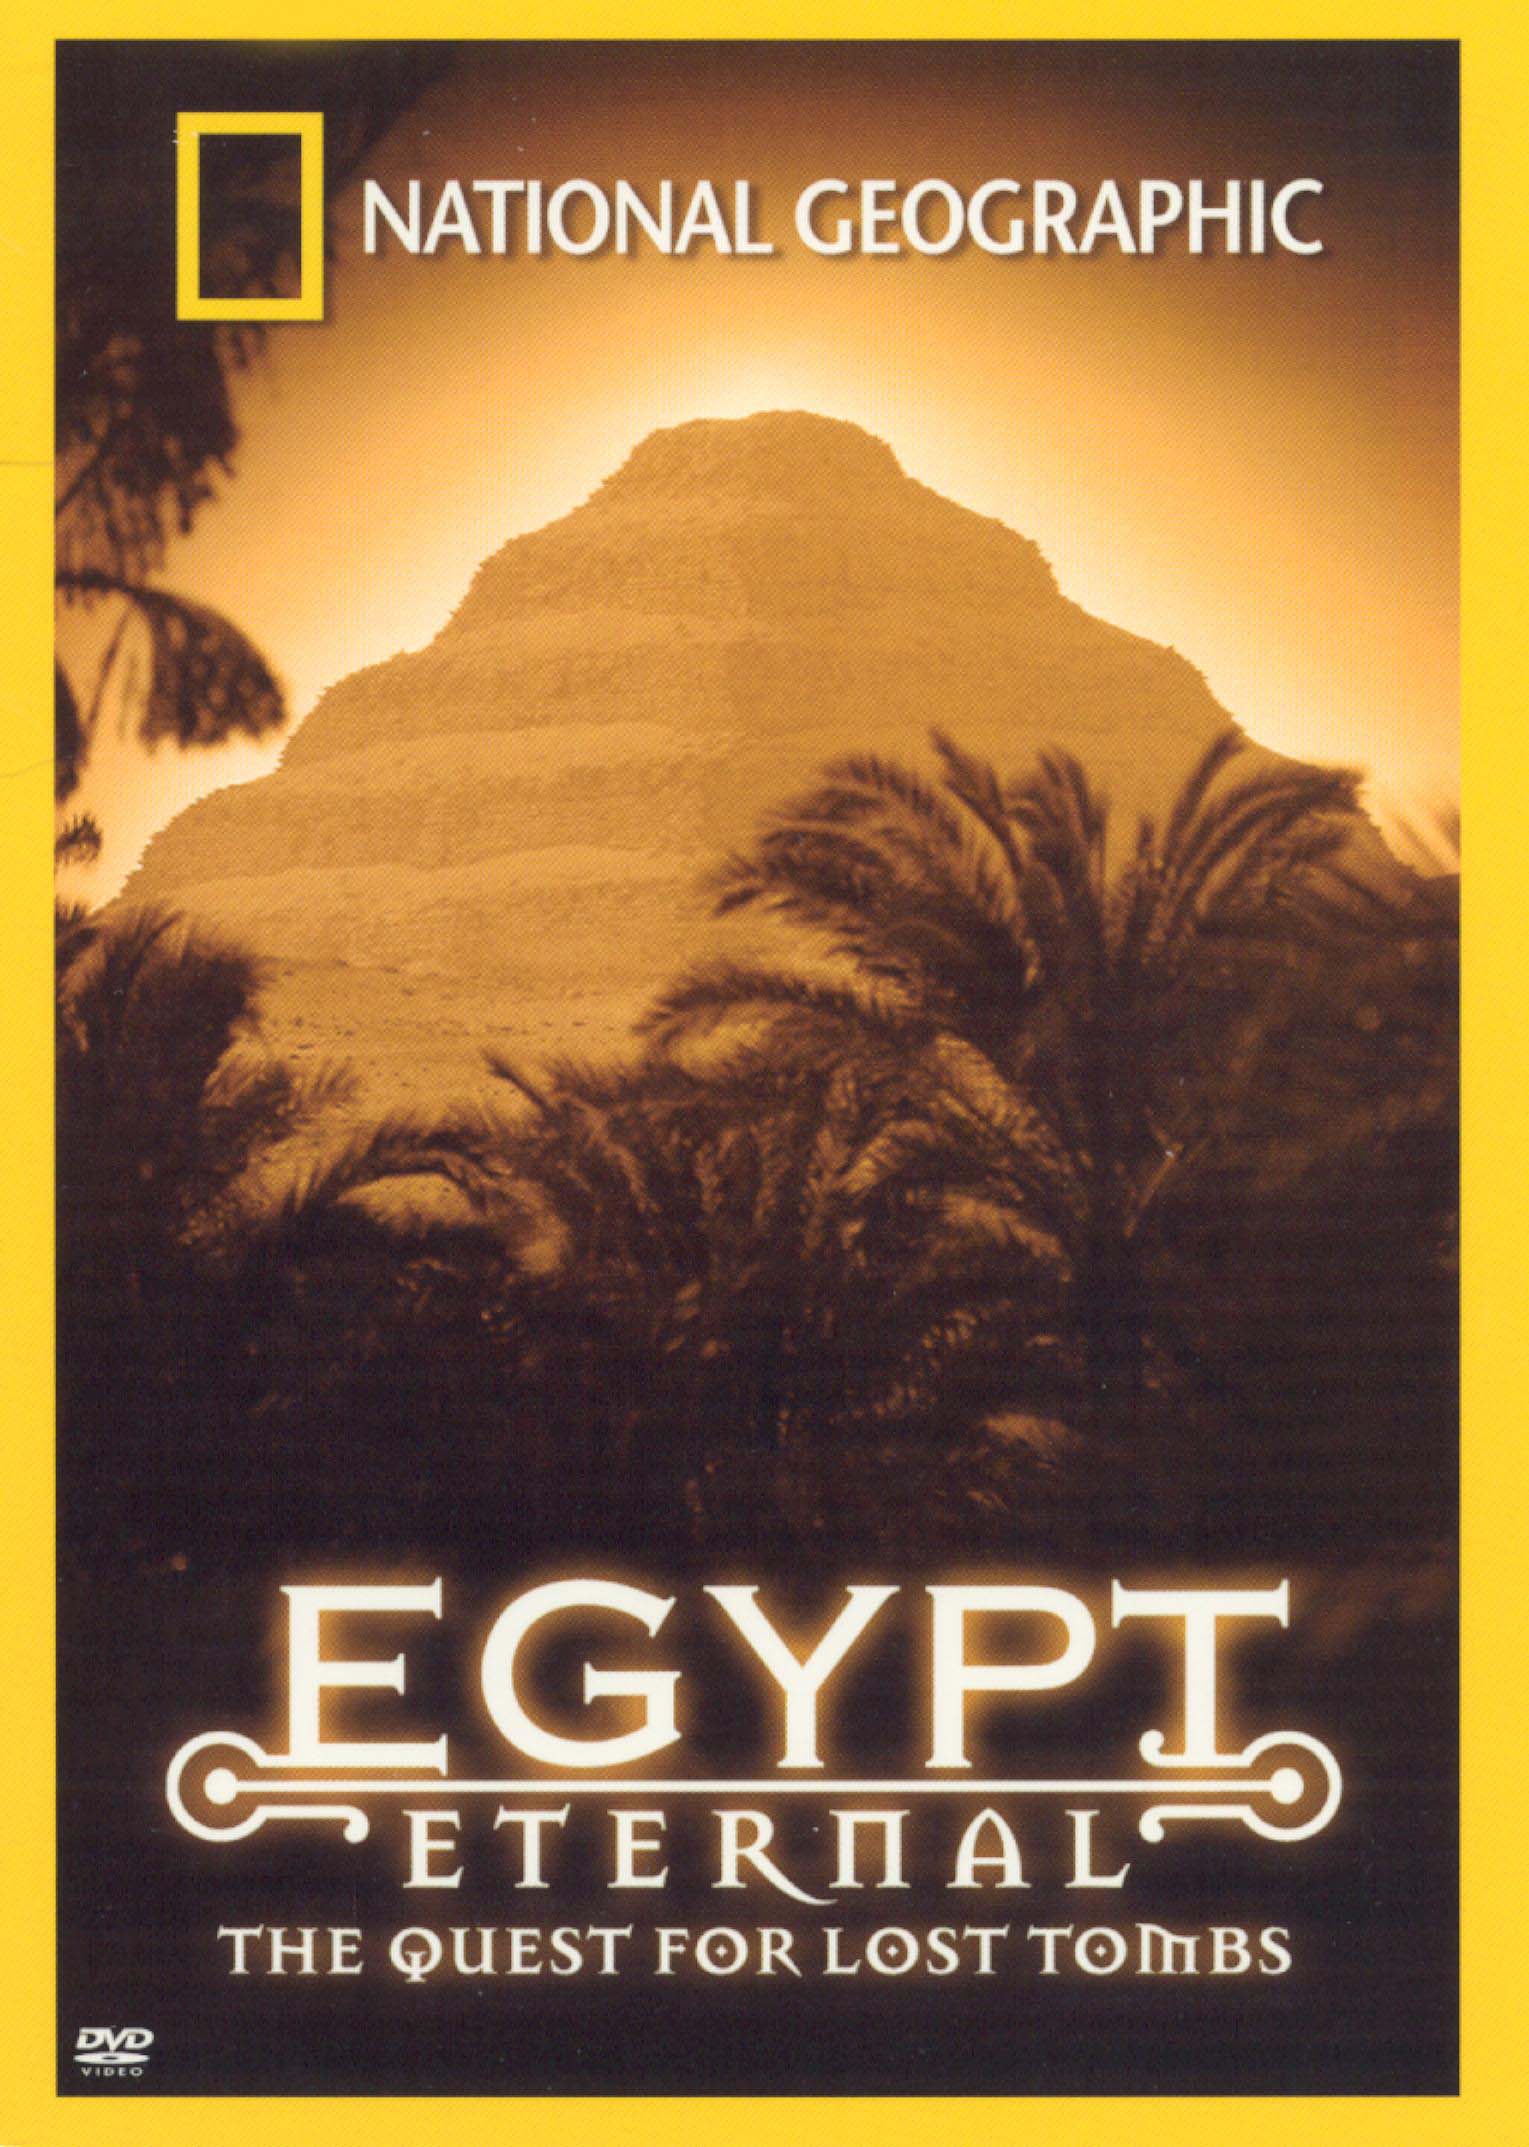 National Geographic Egypt Eternal The Quest For Lost